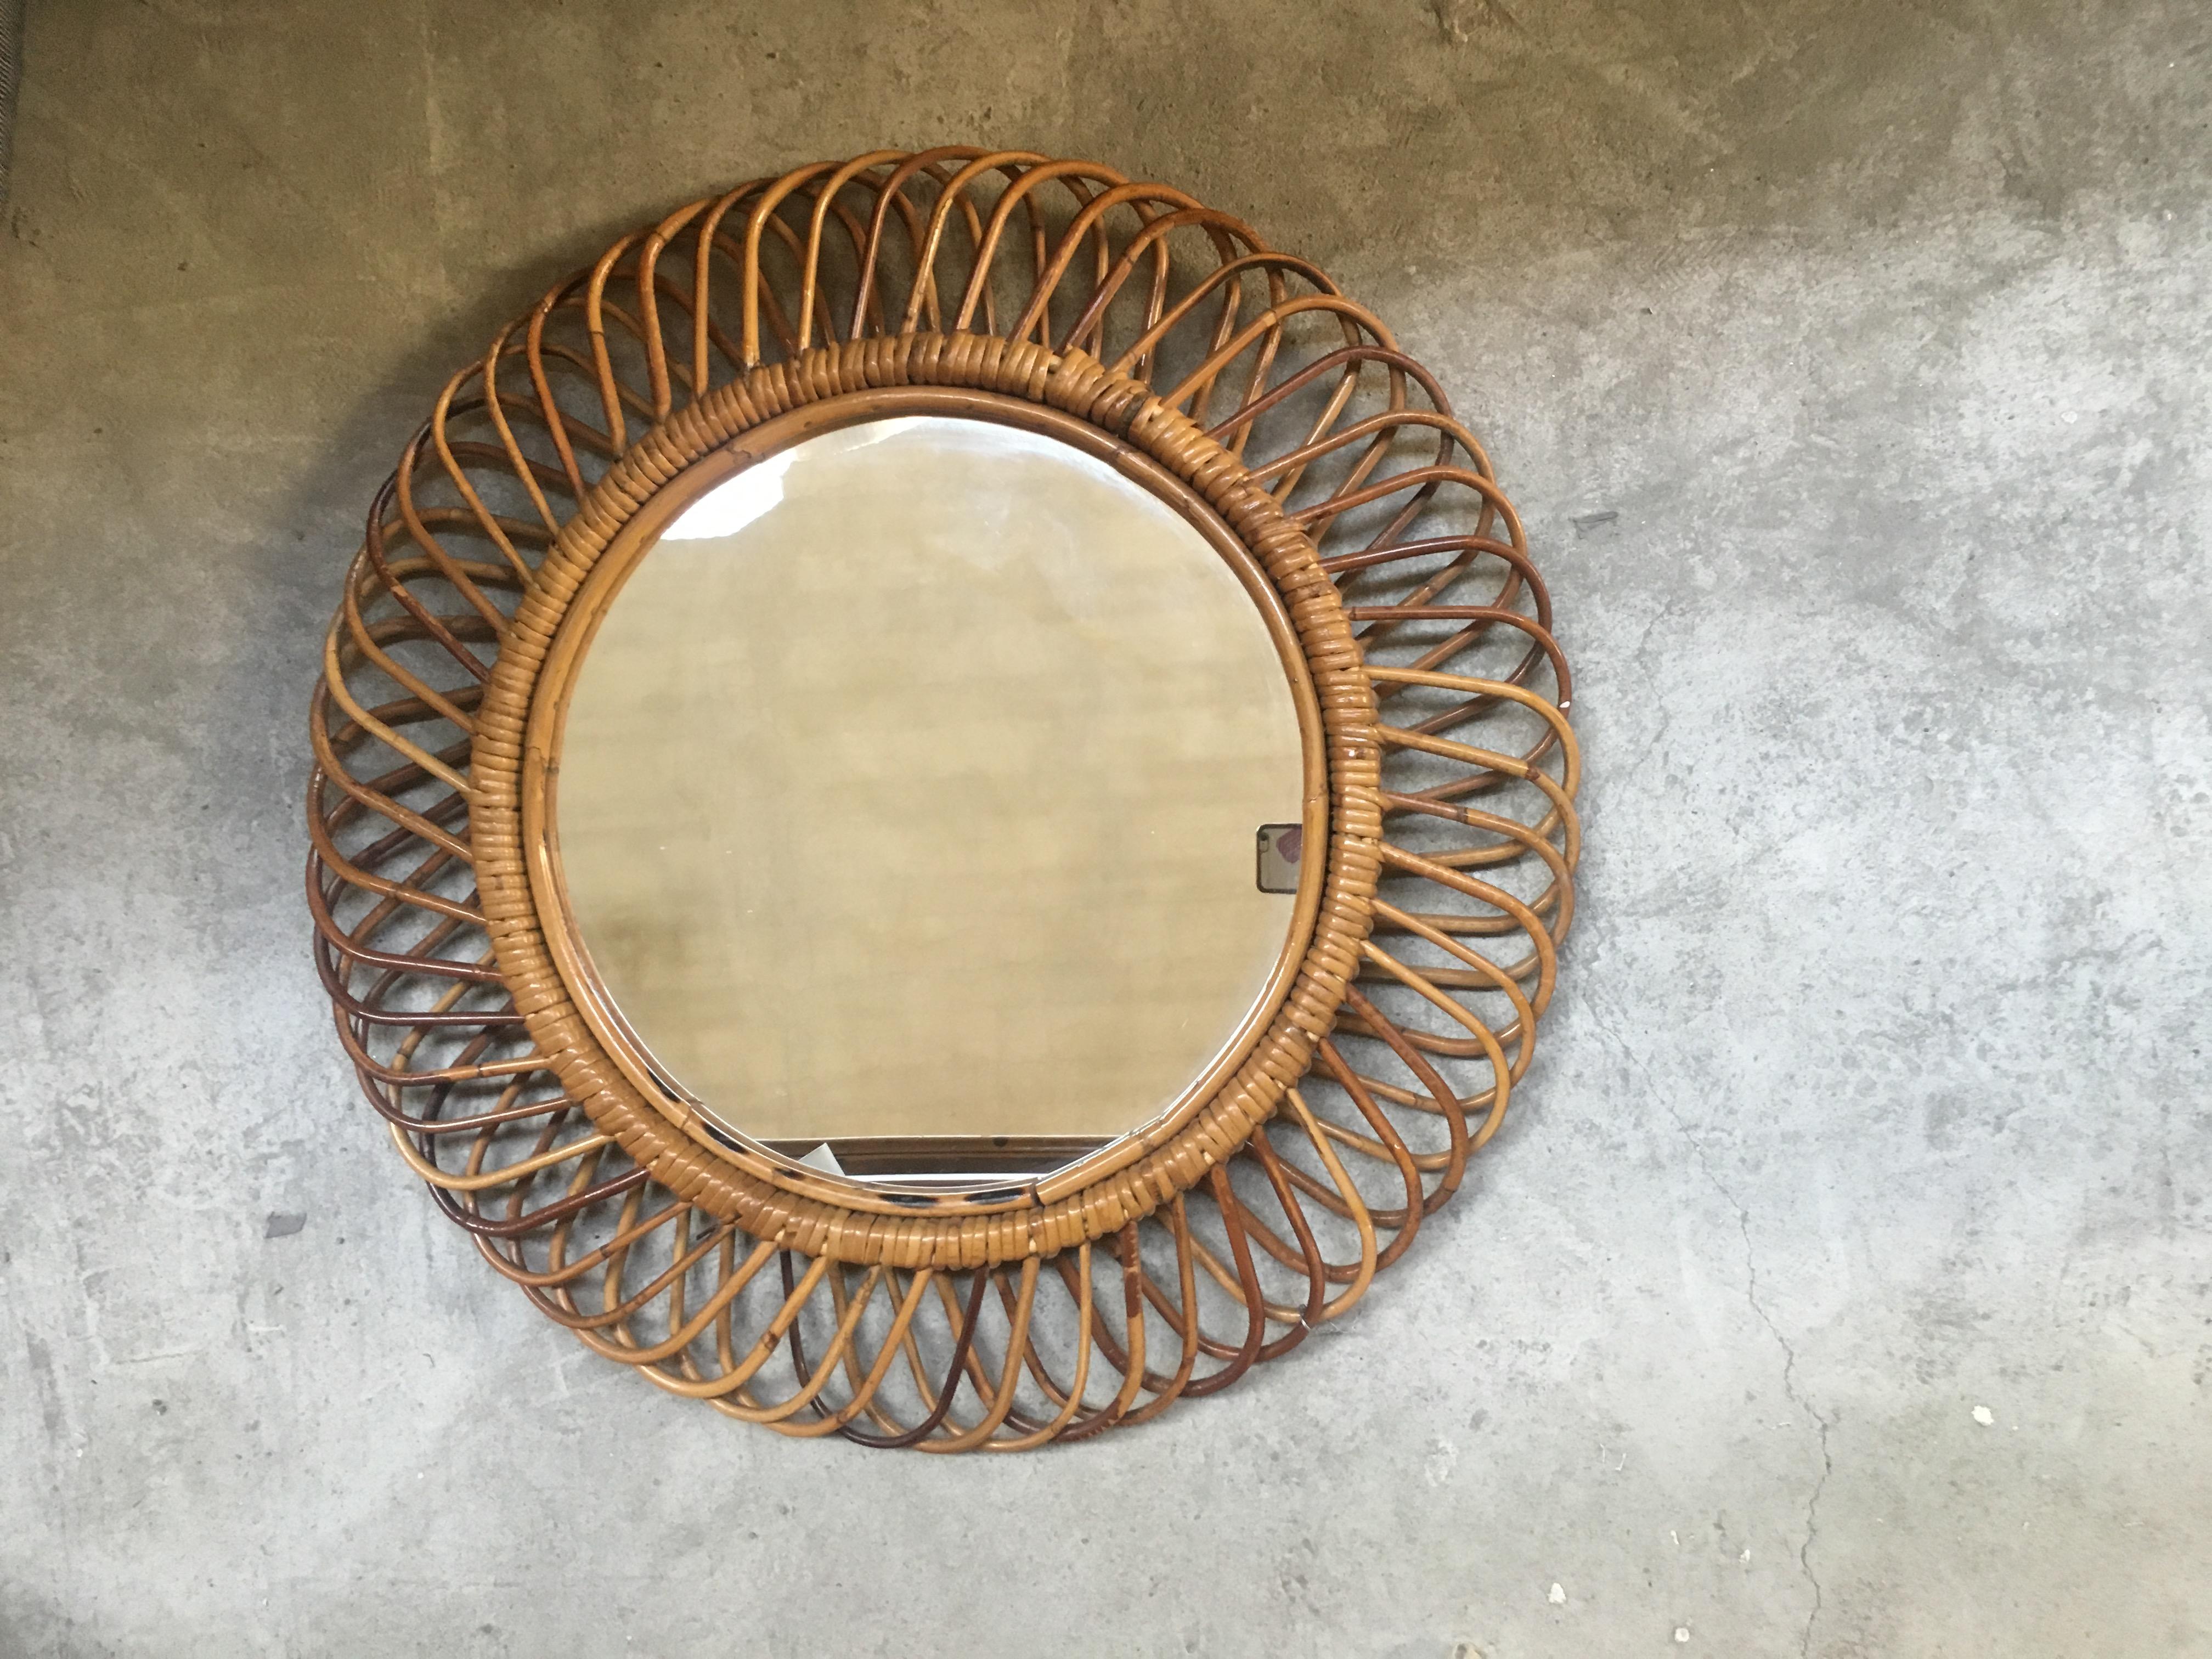 Mid-Century Modern Italian French Riviera Wicker cane sunburst circular wall mirror from 1960s.
The mirror is in very good vintage conditions.
 